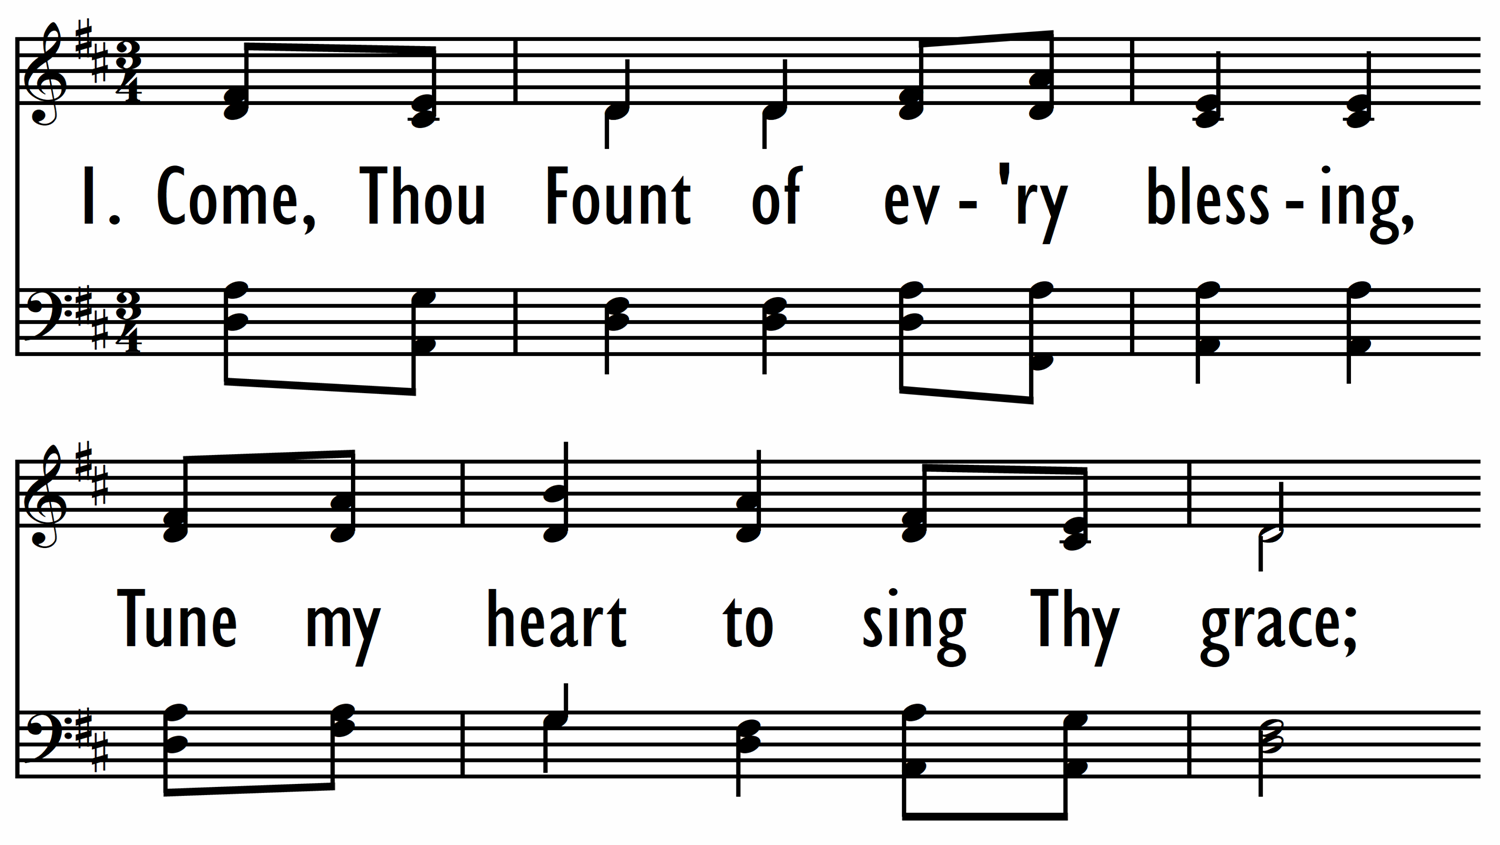 COME, THOU FOUNT OF EVERY BLESSING - with last st. setting and opt choral ending-ppt